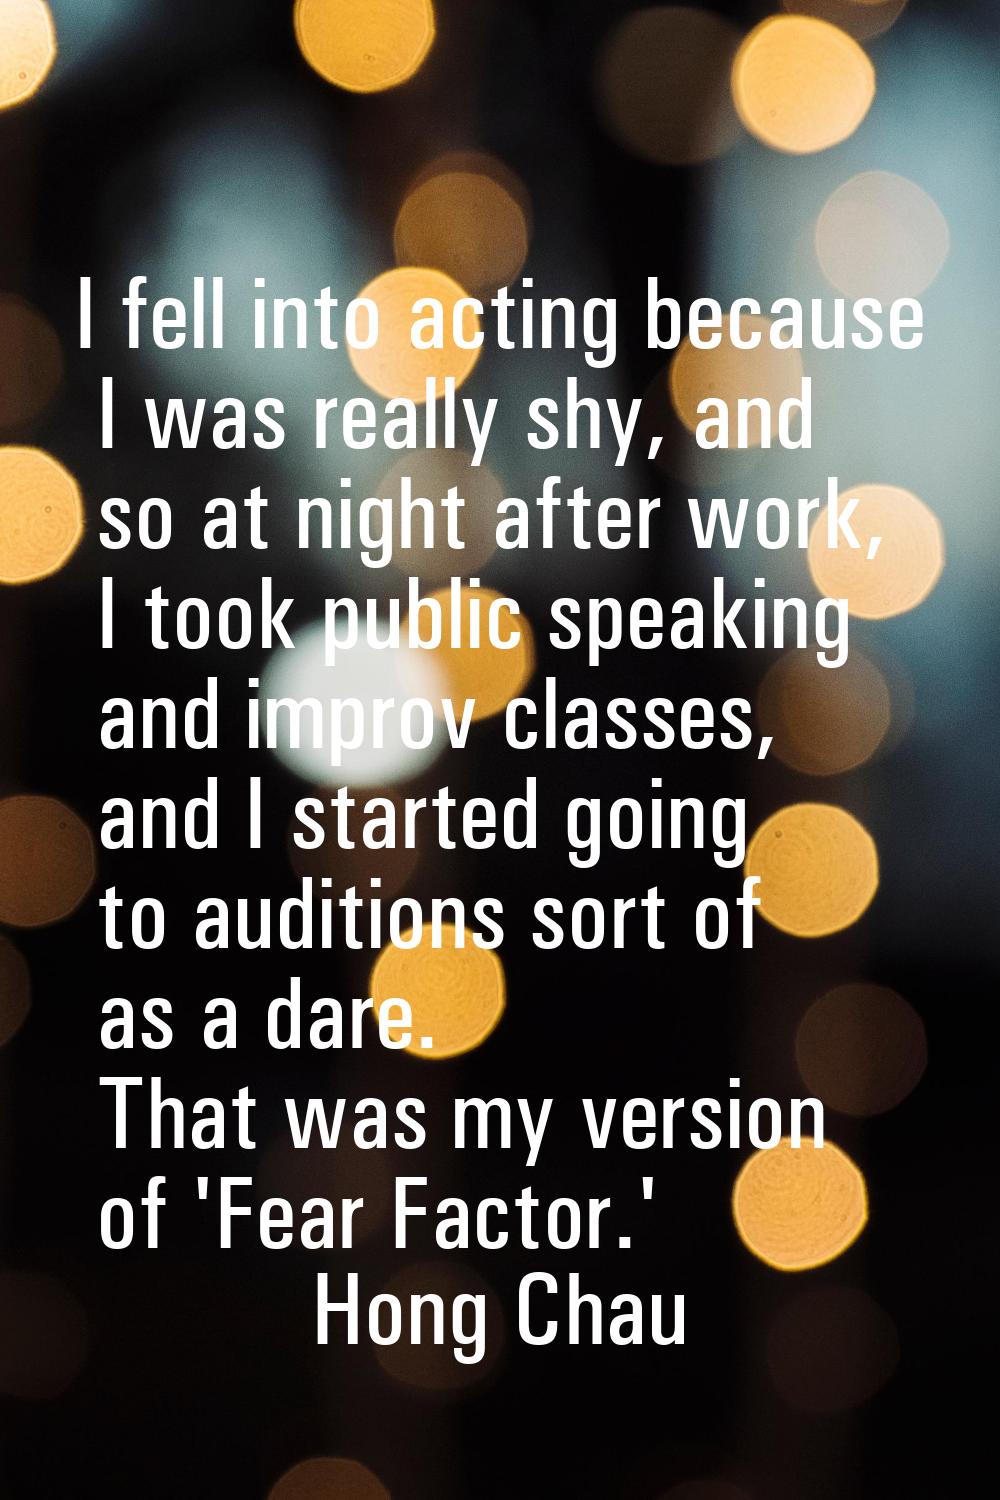 I fell into acting because I was really shy, and so at night after work, I took public speaking and